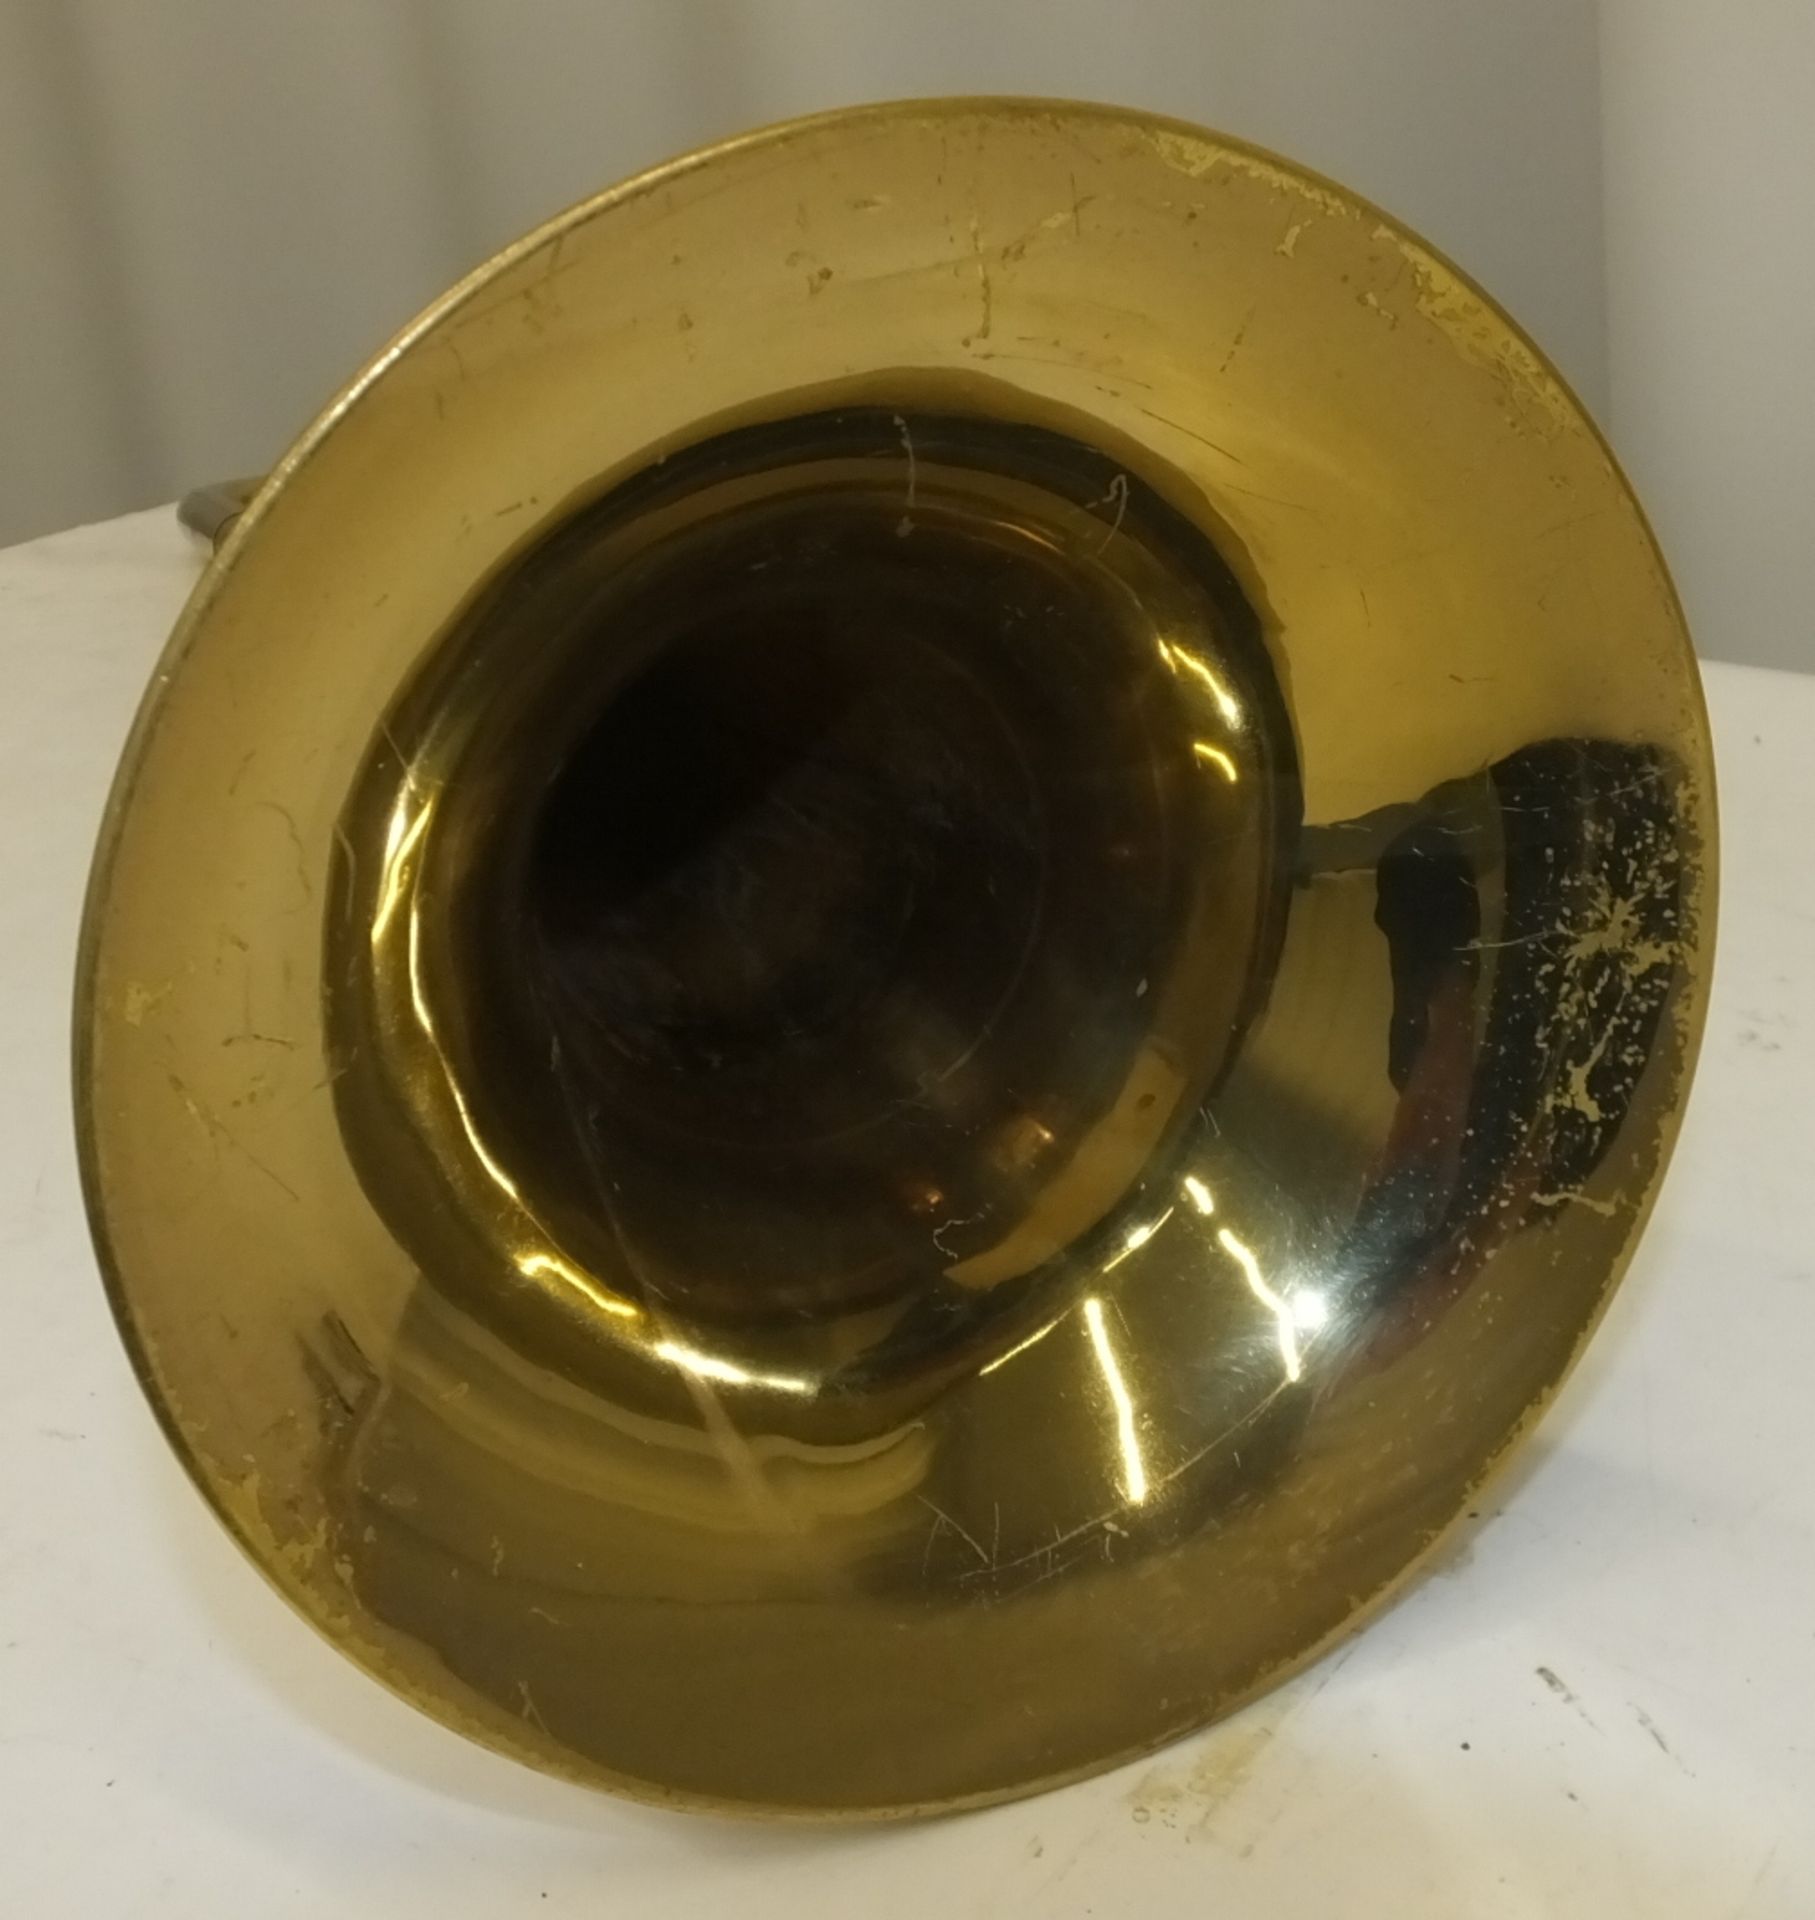 Bach Trombone in case - Serial Number - 89521 - Image 9 of 15